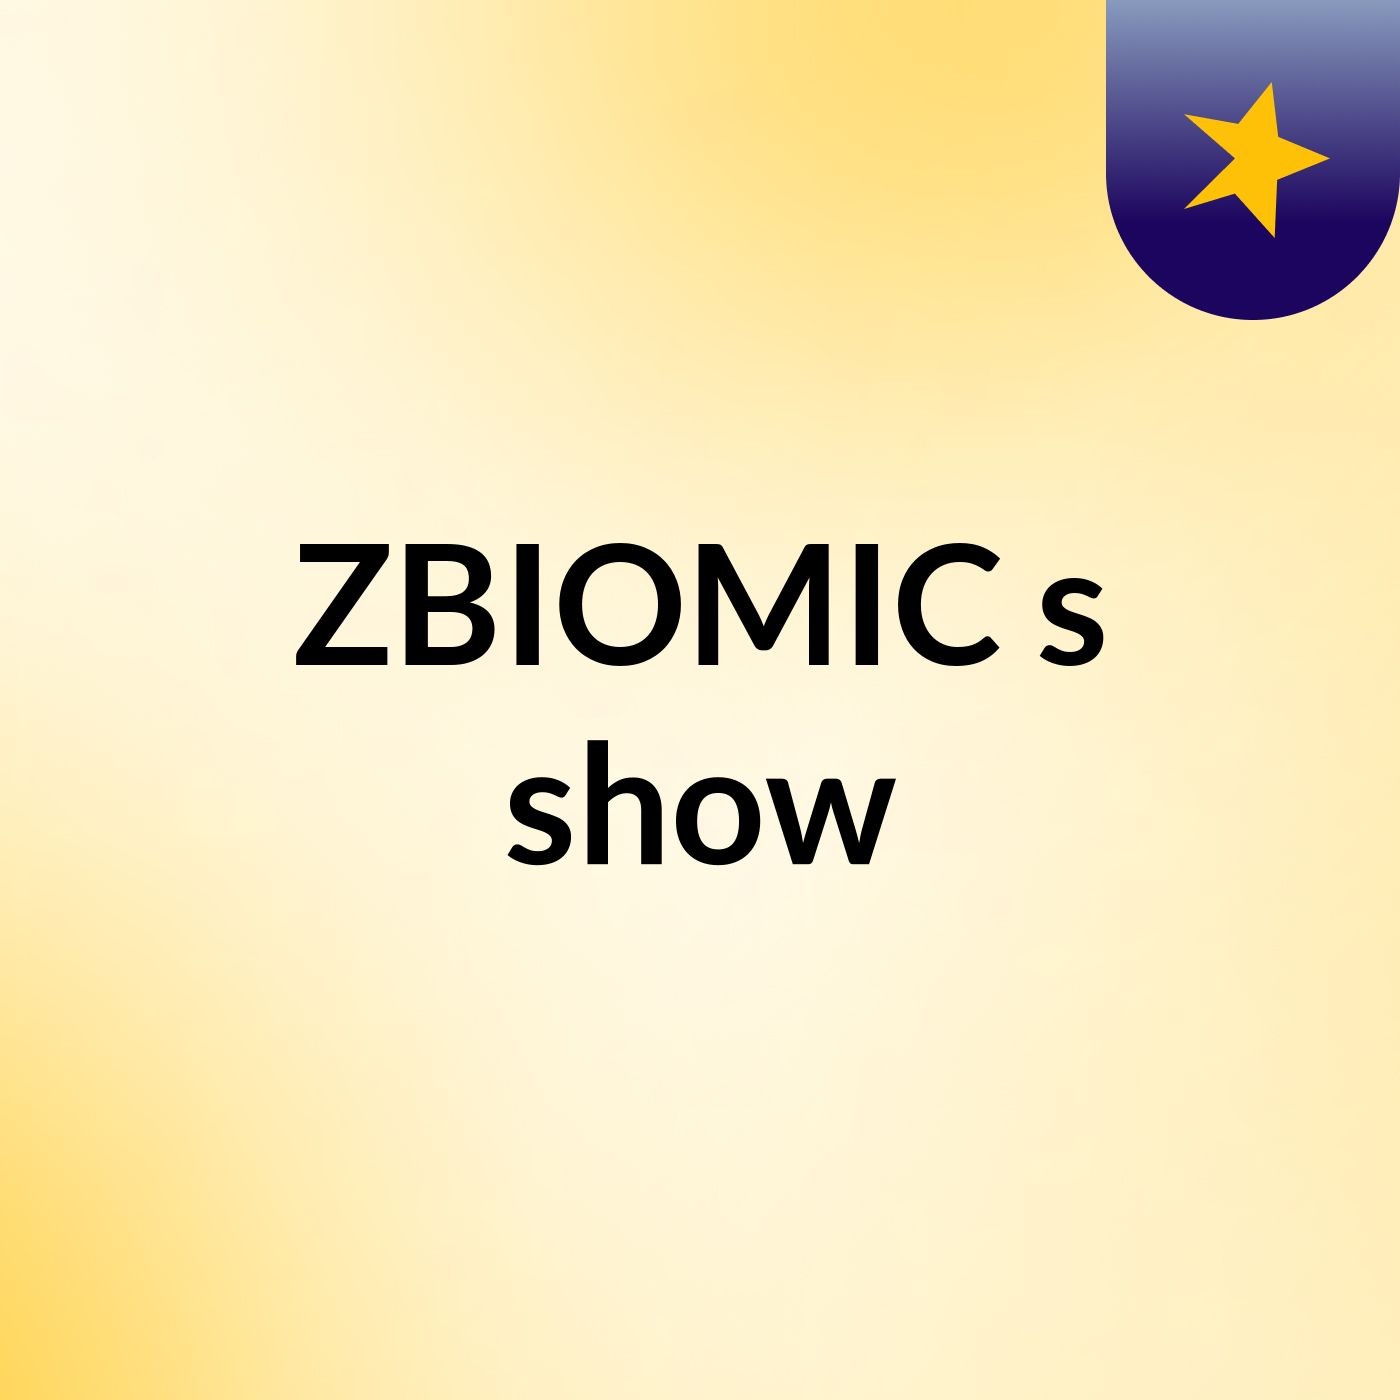 ZBIOMIC's show